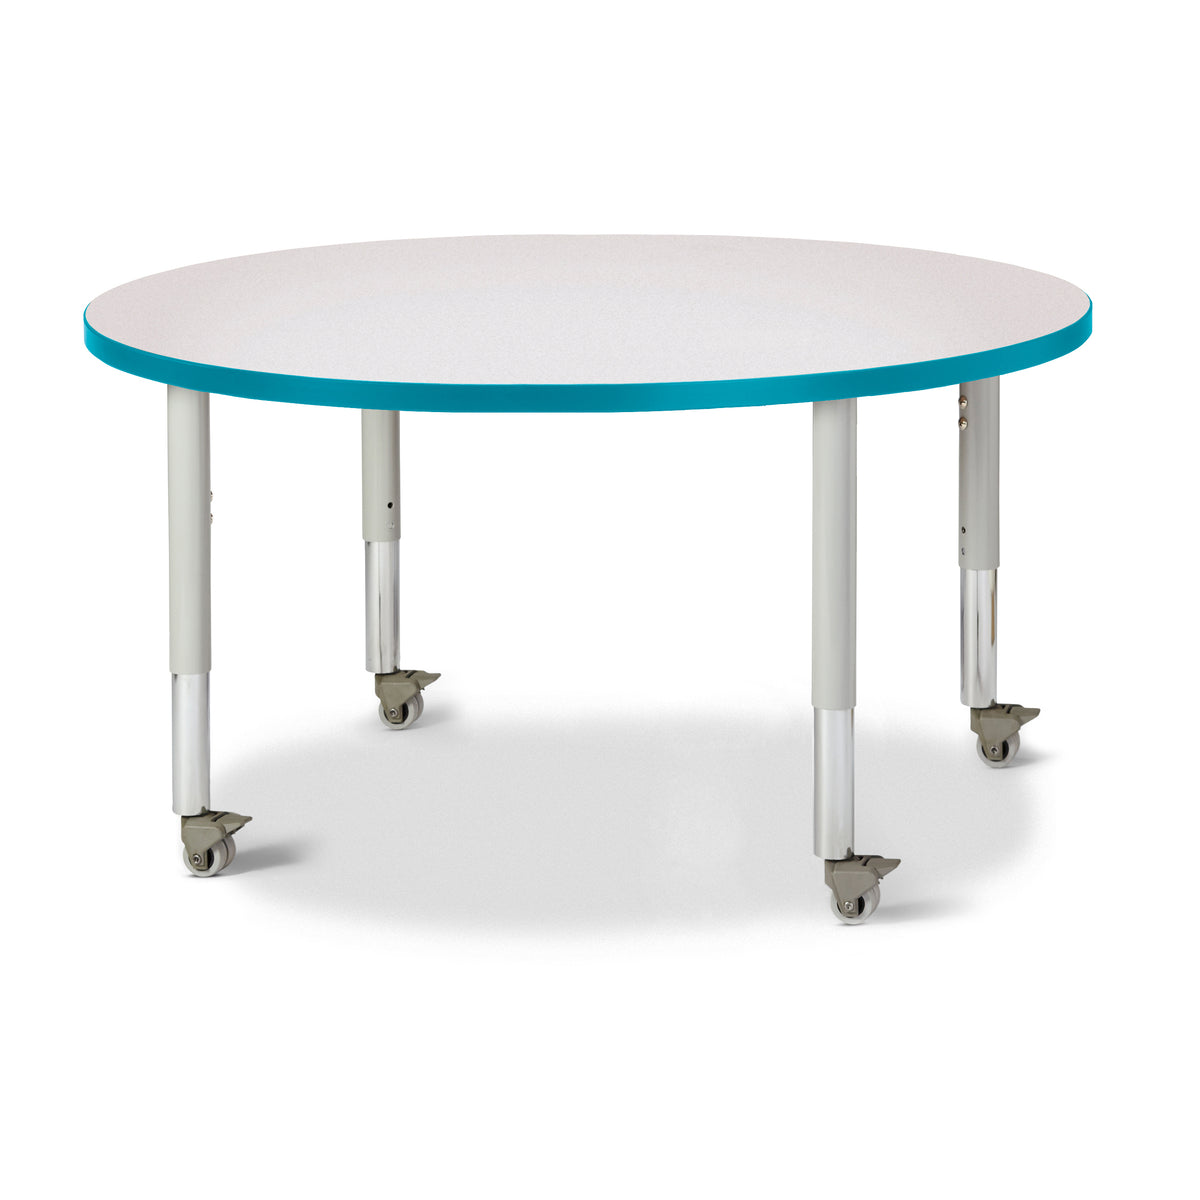 6468JCM005, Berries Round Activity Table - 42" Diameter, Mobile - Freckled Gray/Teal/Gray